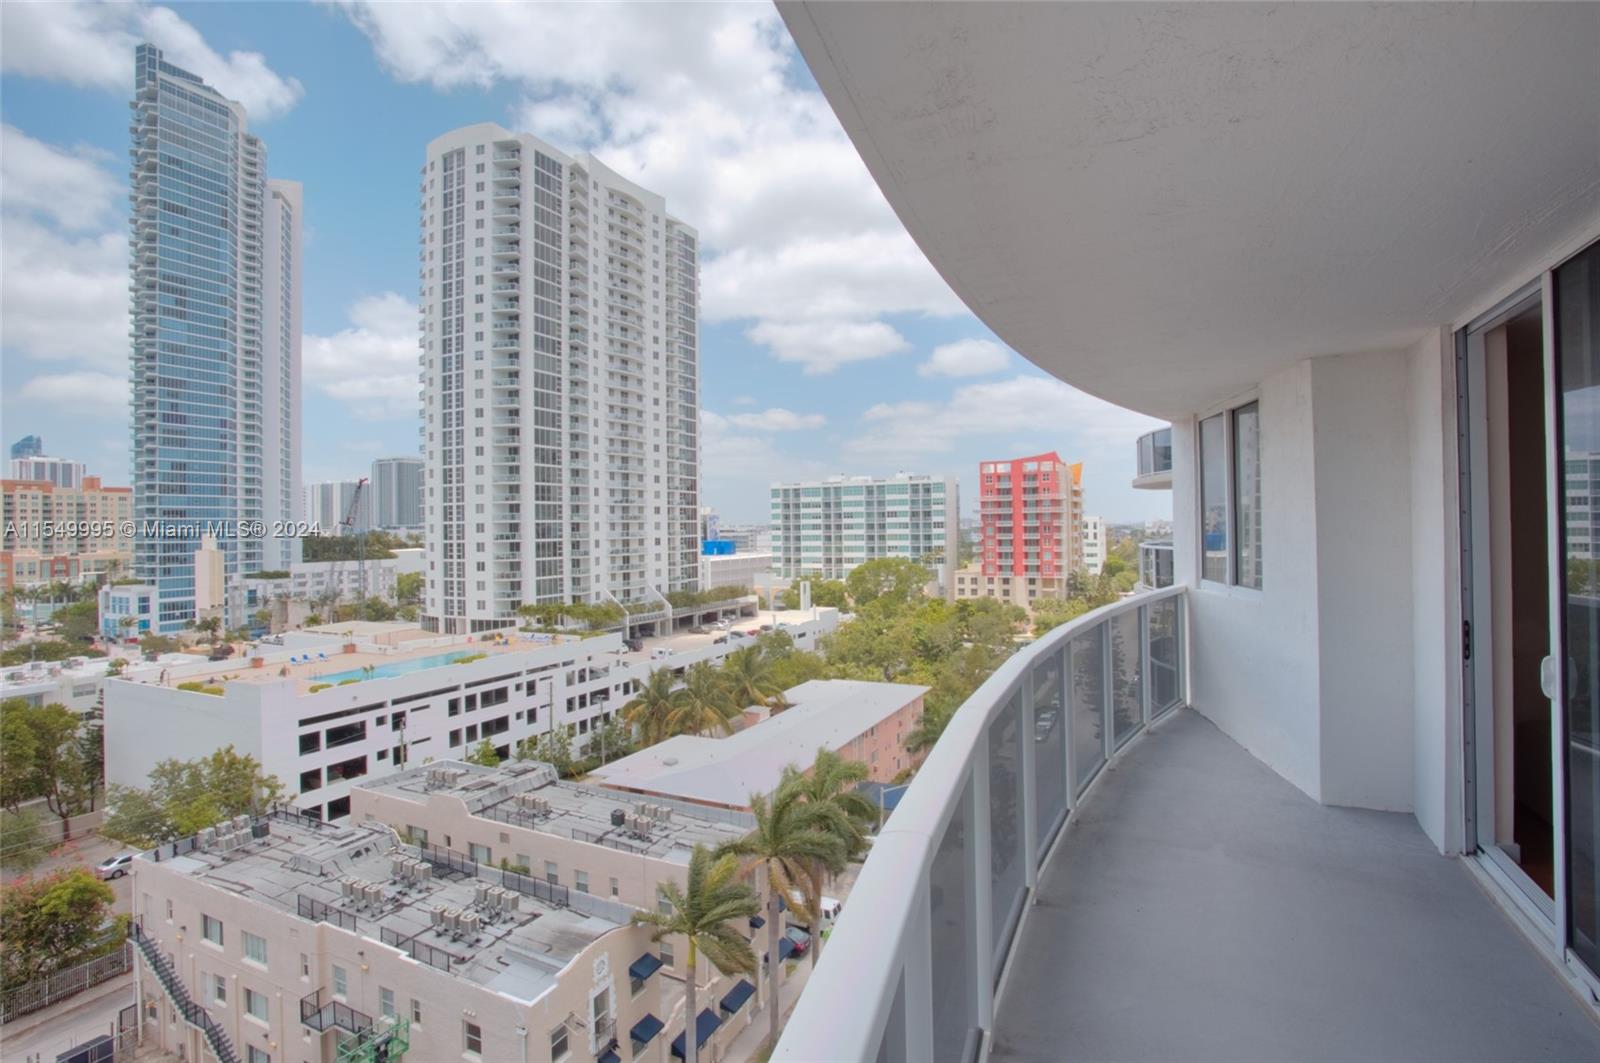 Spectacular 2 bedrooms and 2 baths. Amazing skylines and bay views. Modern kitchen, stainless steel appliances, cherry laminate wood floors, granite countertops, and Berber carpet in bedrooms. The building offers a gym, pool, and a social room.